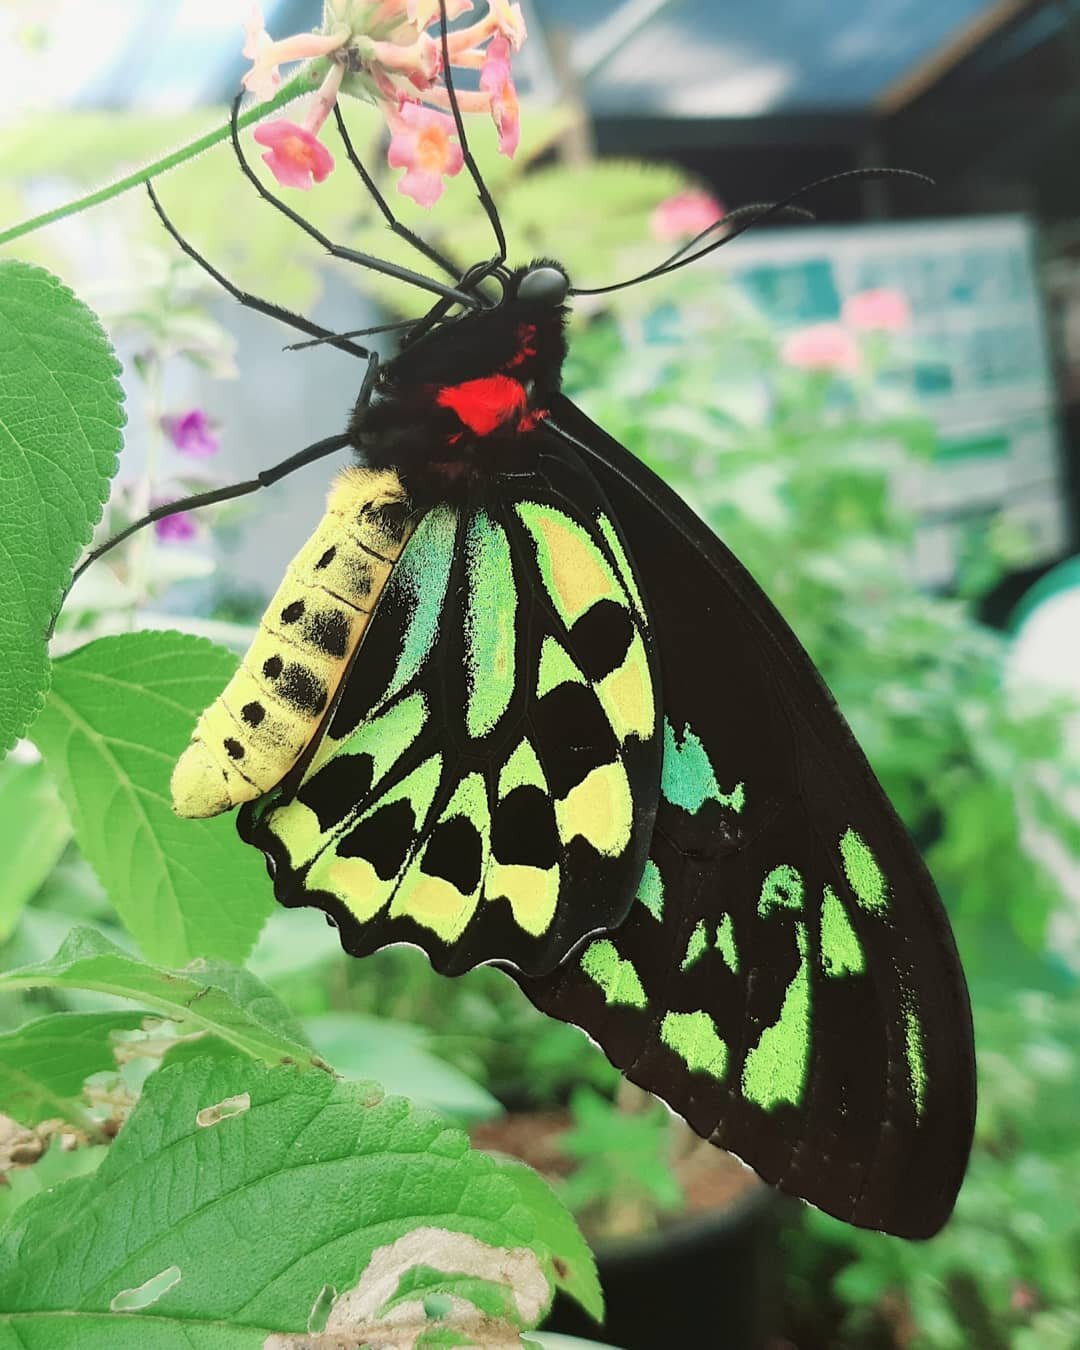 The Birdwing Butterflies are out at the Butterfly House this Sunday &hearts;️🦋

#gcbutterflyhouse #gcbutterflies #goldcoast #butterflies #butterfly #birdwings #thingstodo #fun #schoolholidays #goldcoastbutterflies #goldcoastbutterflyhouse #carrarama